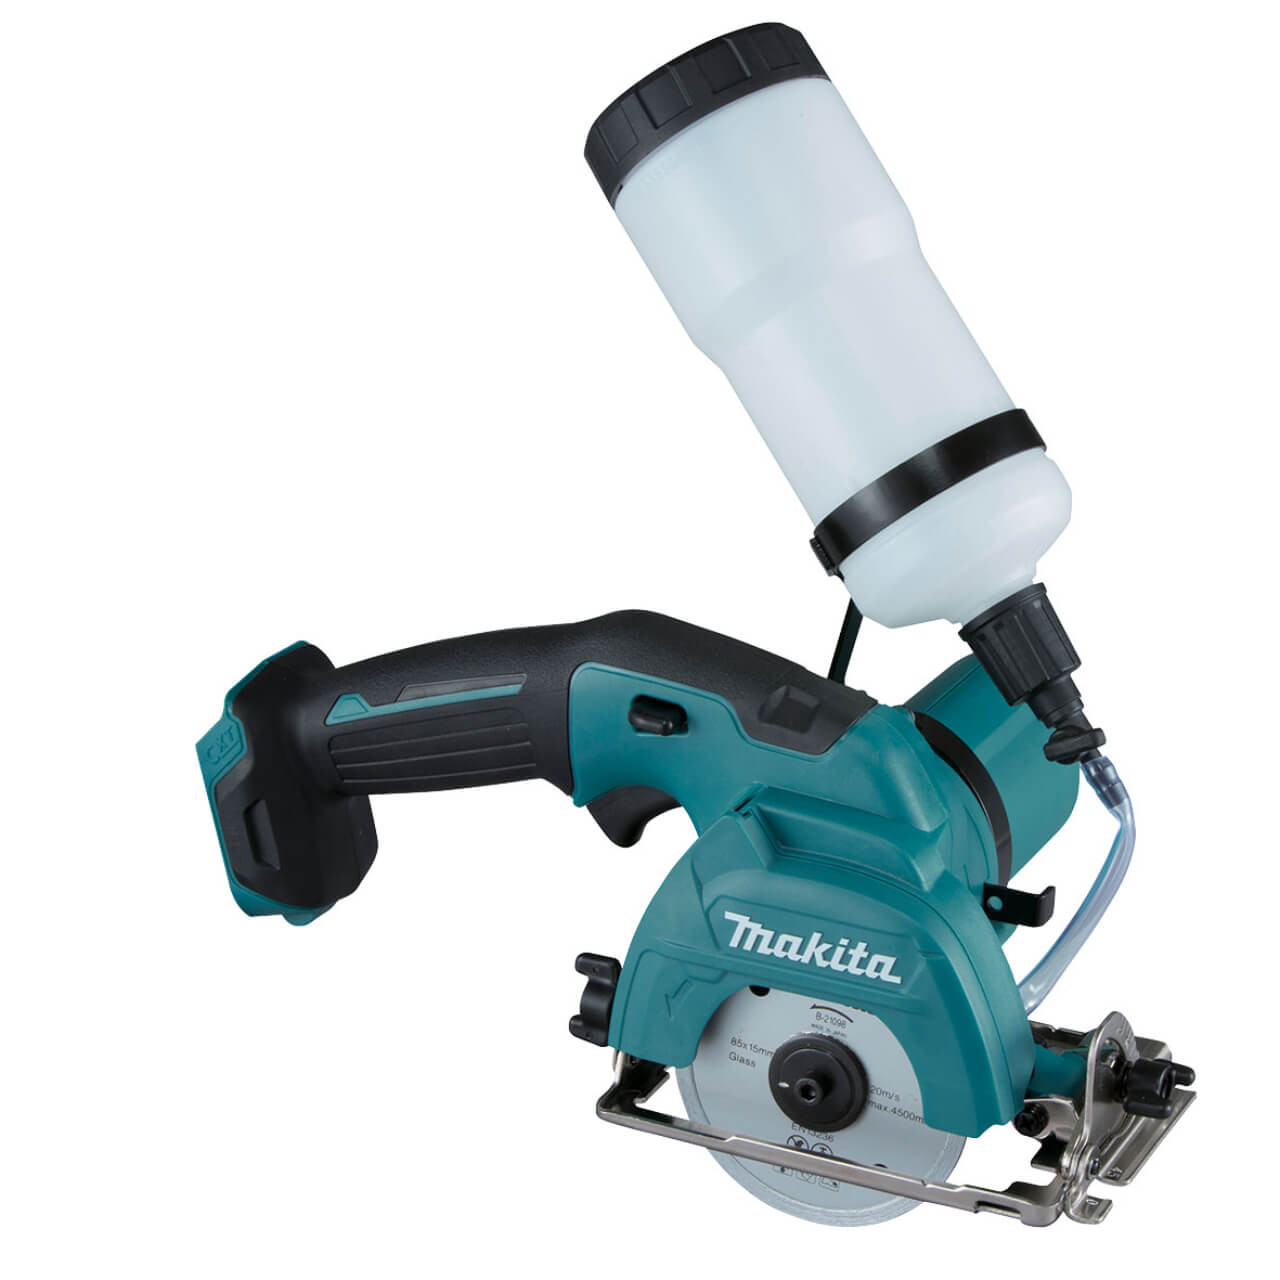 Makita 12V Max 85mm (3-1/4”) Diamond Cutter - Includes 2 x 2.0Ah Batteries & Rapid Charger